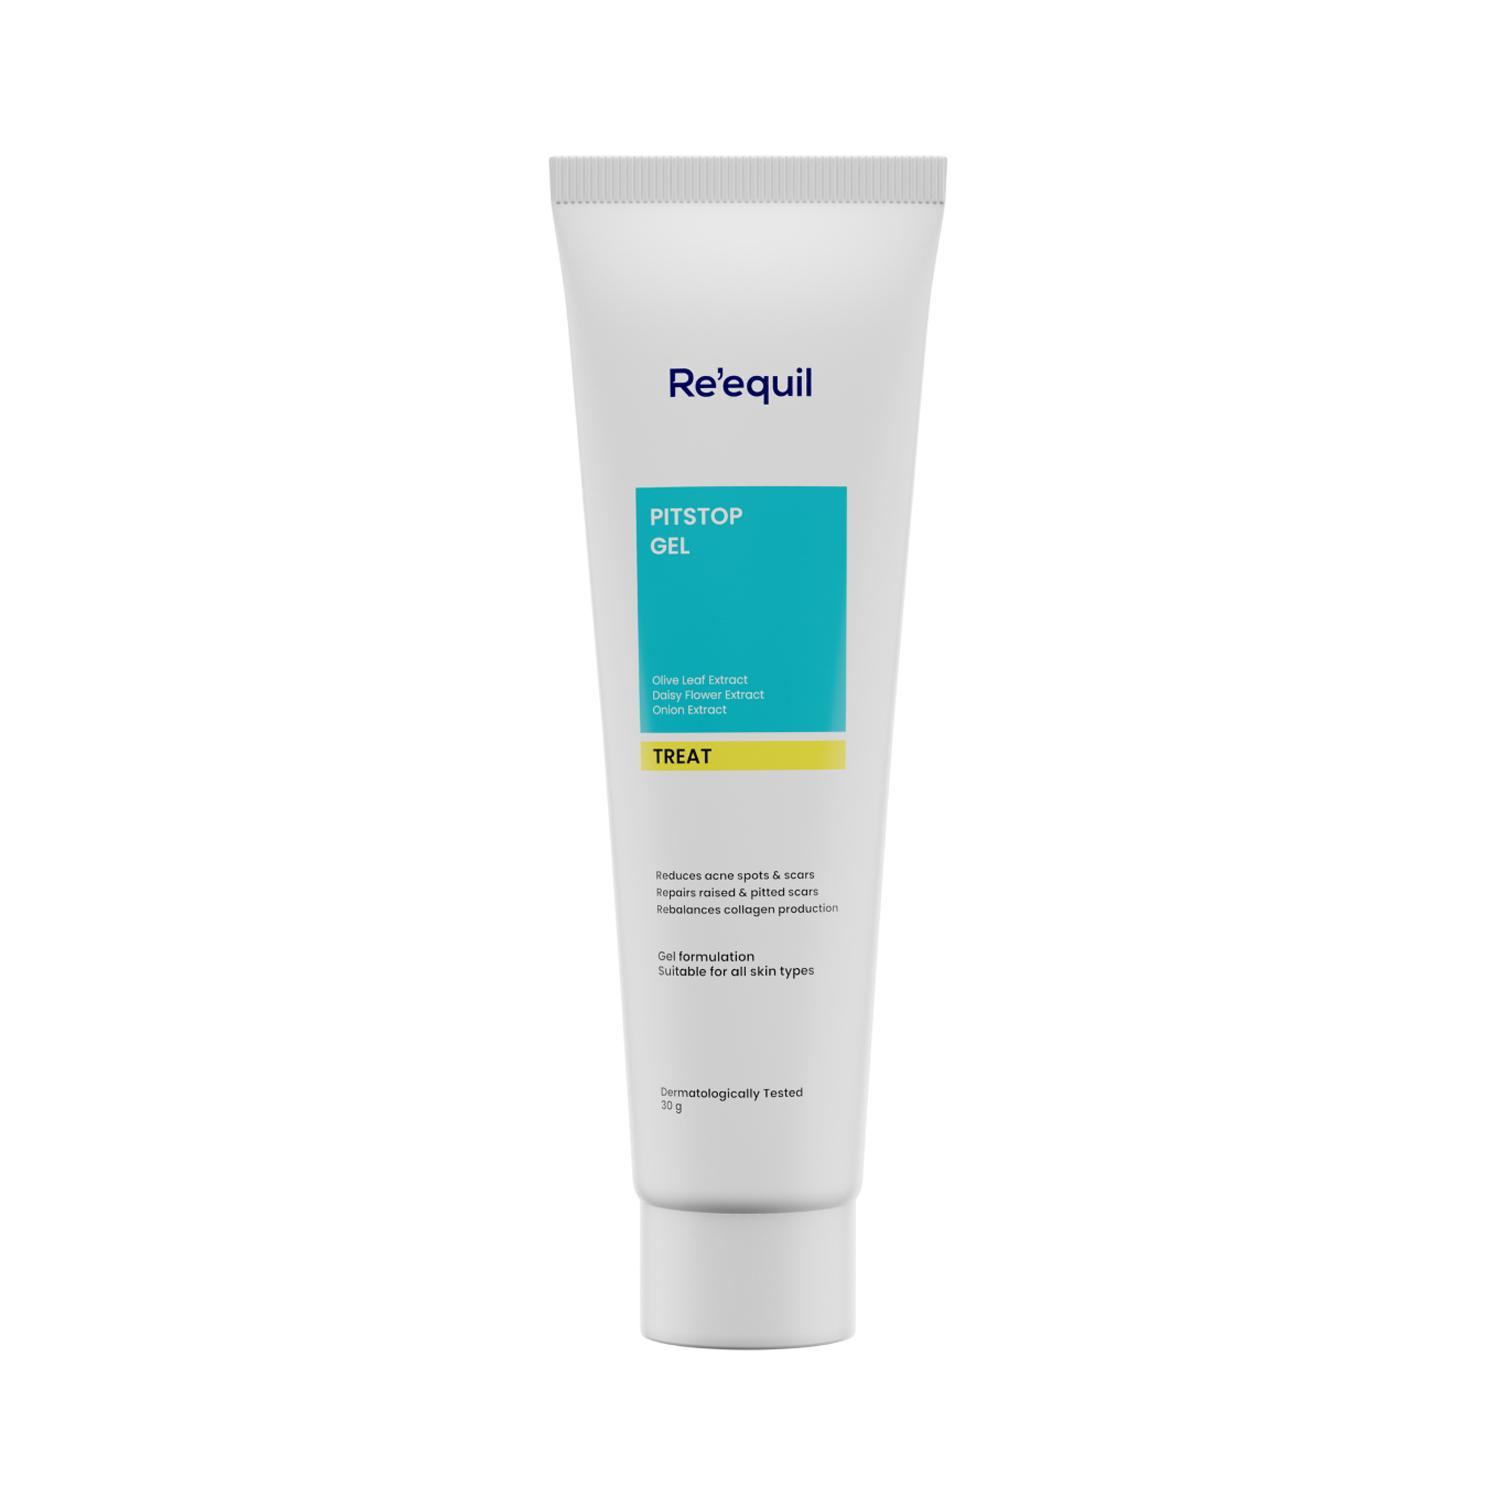 re'equil-acne-scars-&-pits-removal-pitstop-gel-(30g)